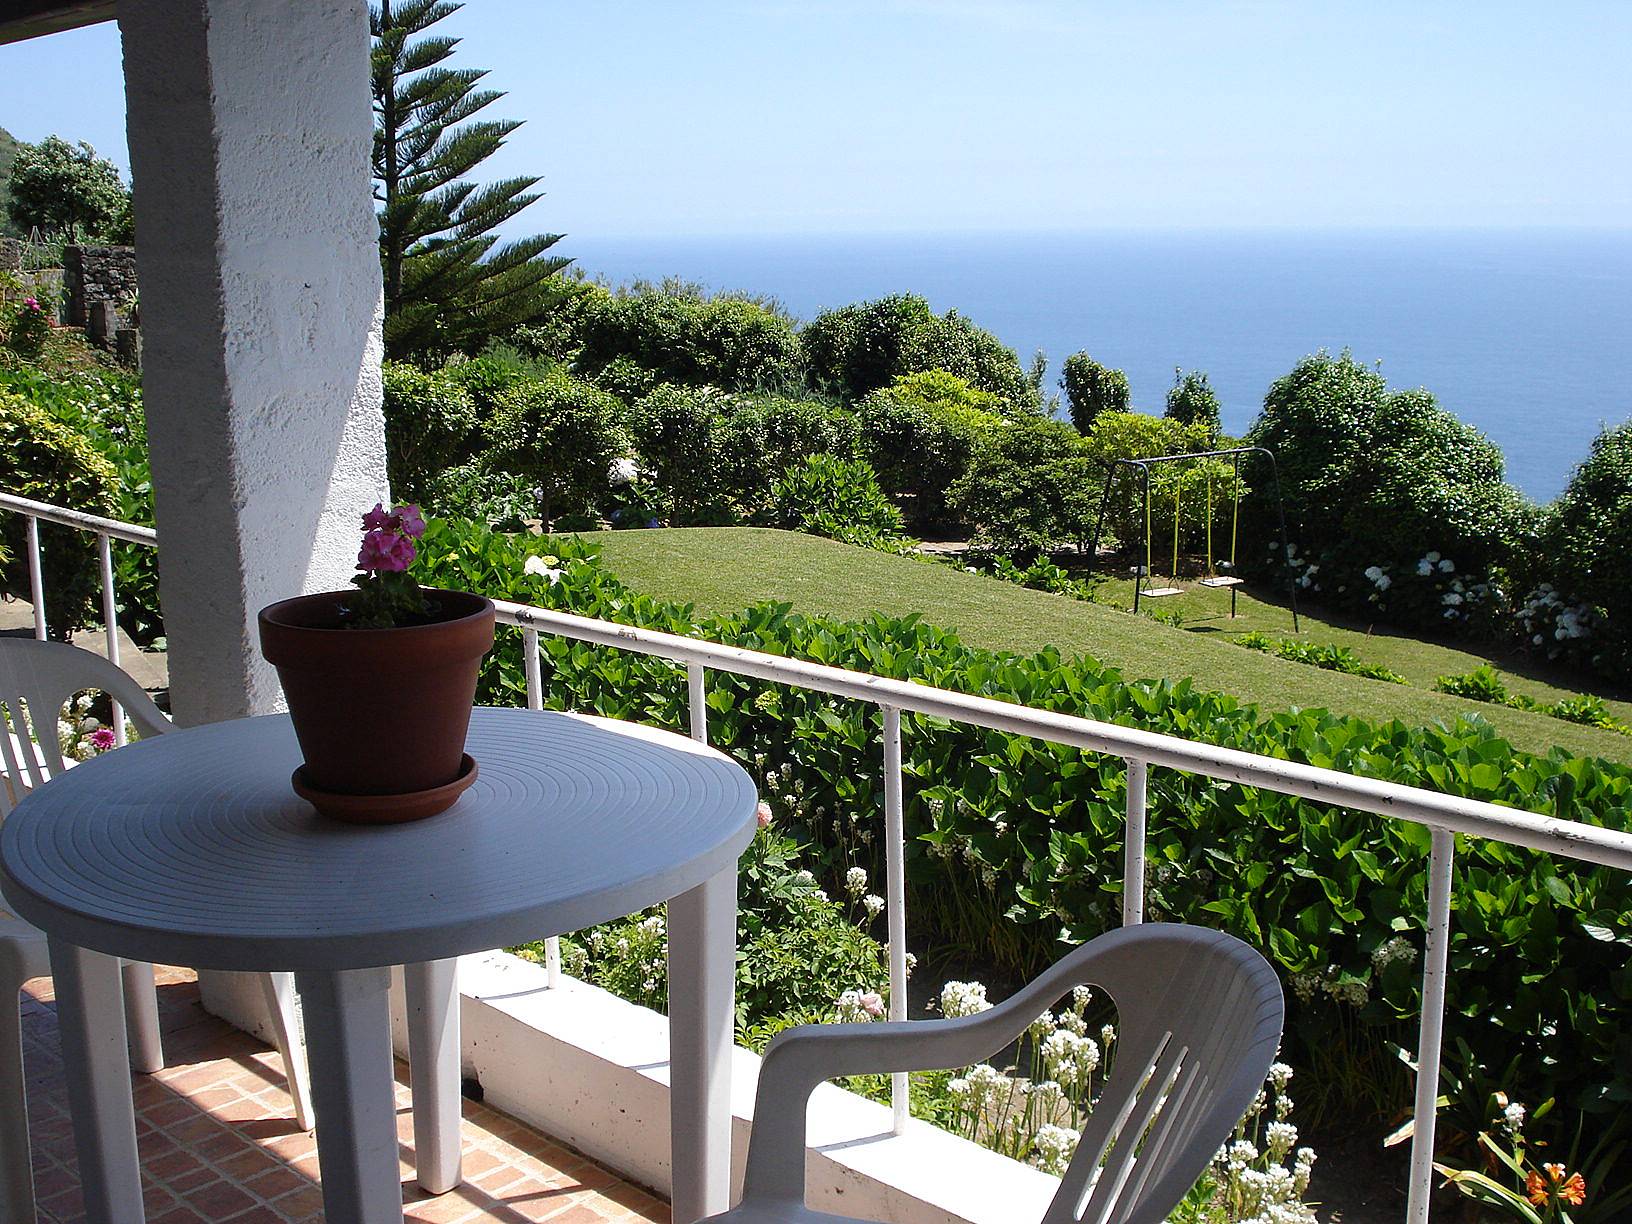 Creatice Apartments Sao Miguel Azores for Large Space